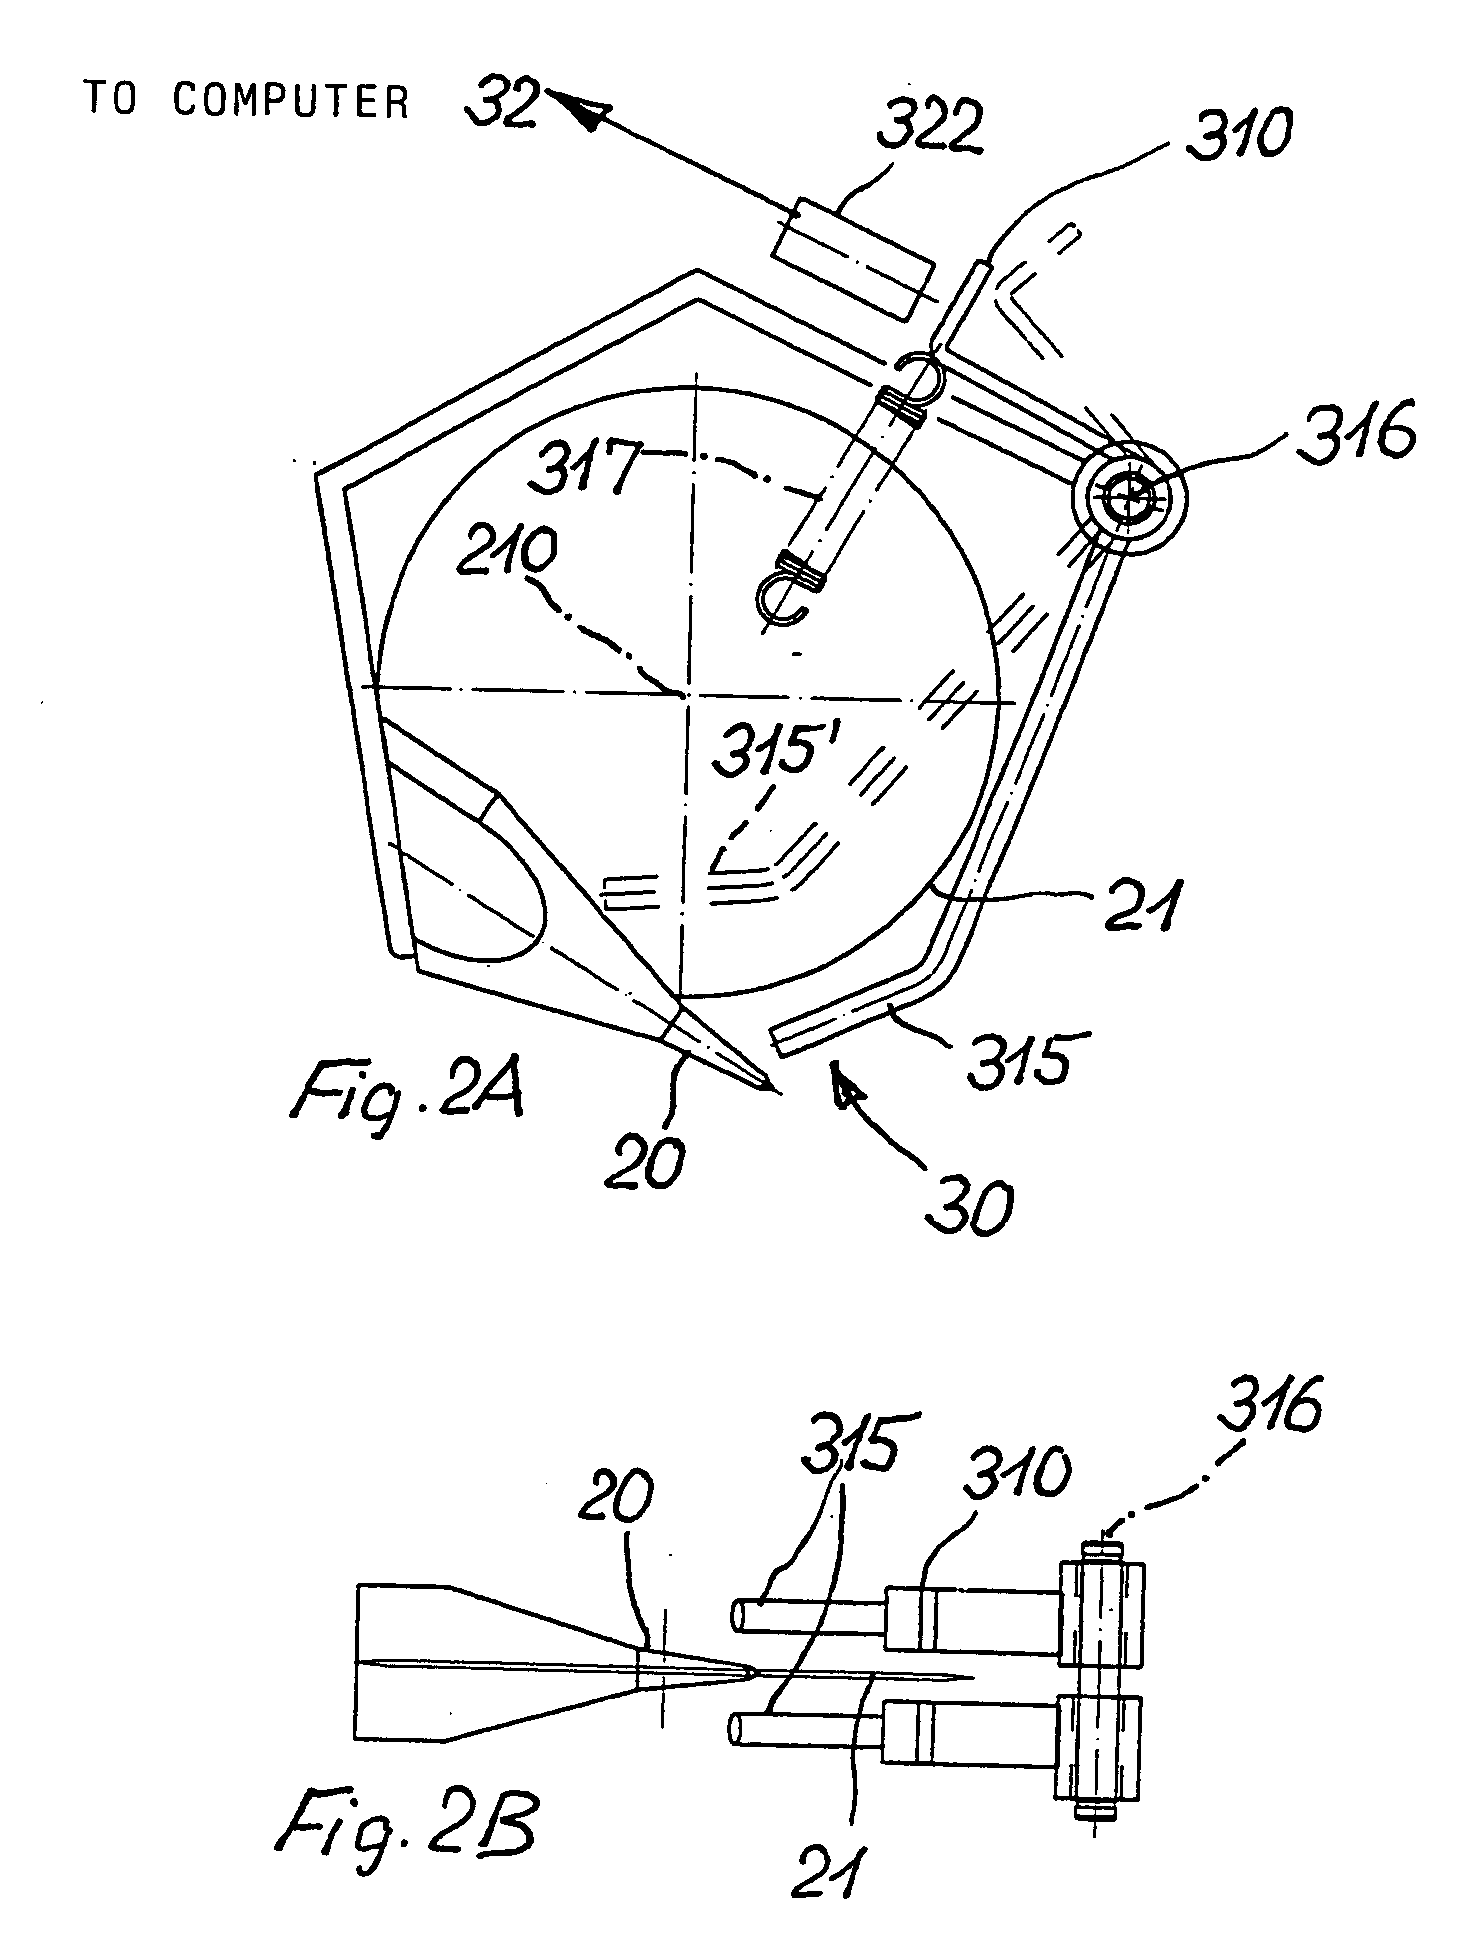 Device and method for controlling the beginning of a tool operation in fish treatment machine